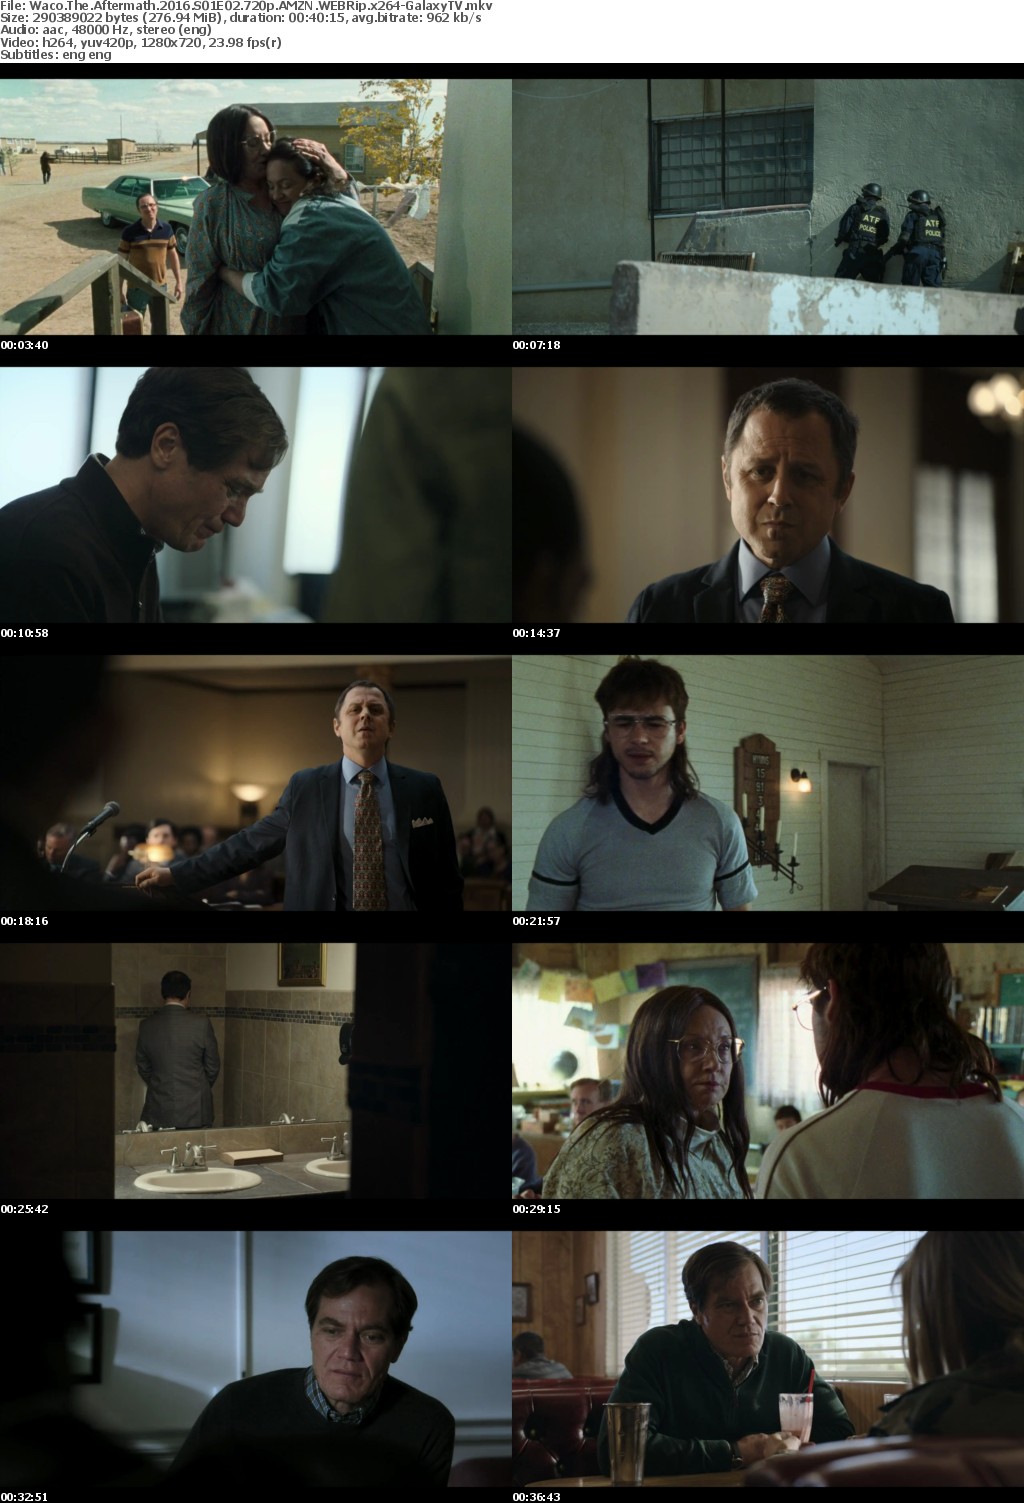 Waco The Aftermath S01 COMPLETE 720p AMZN WEBRip x264-GalaxyTV